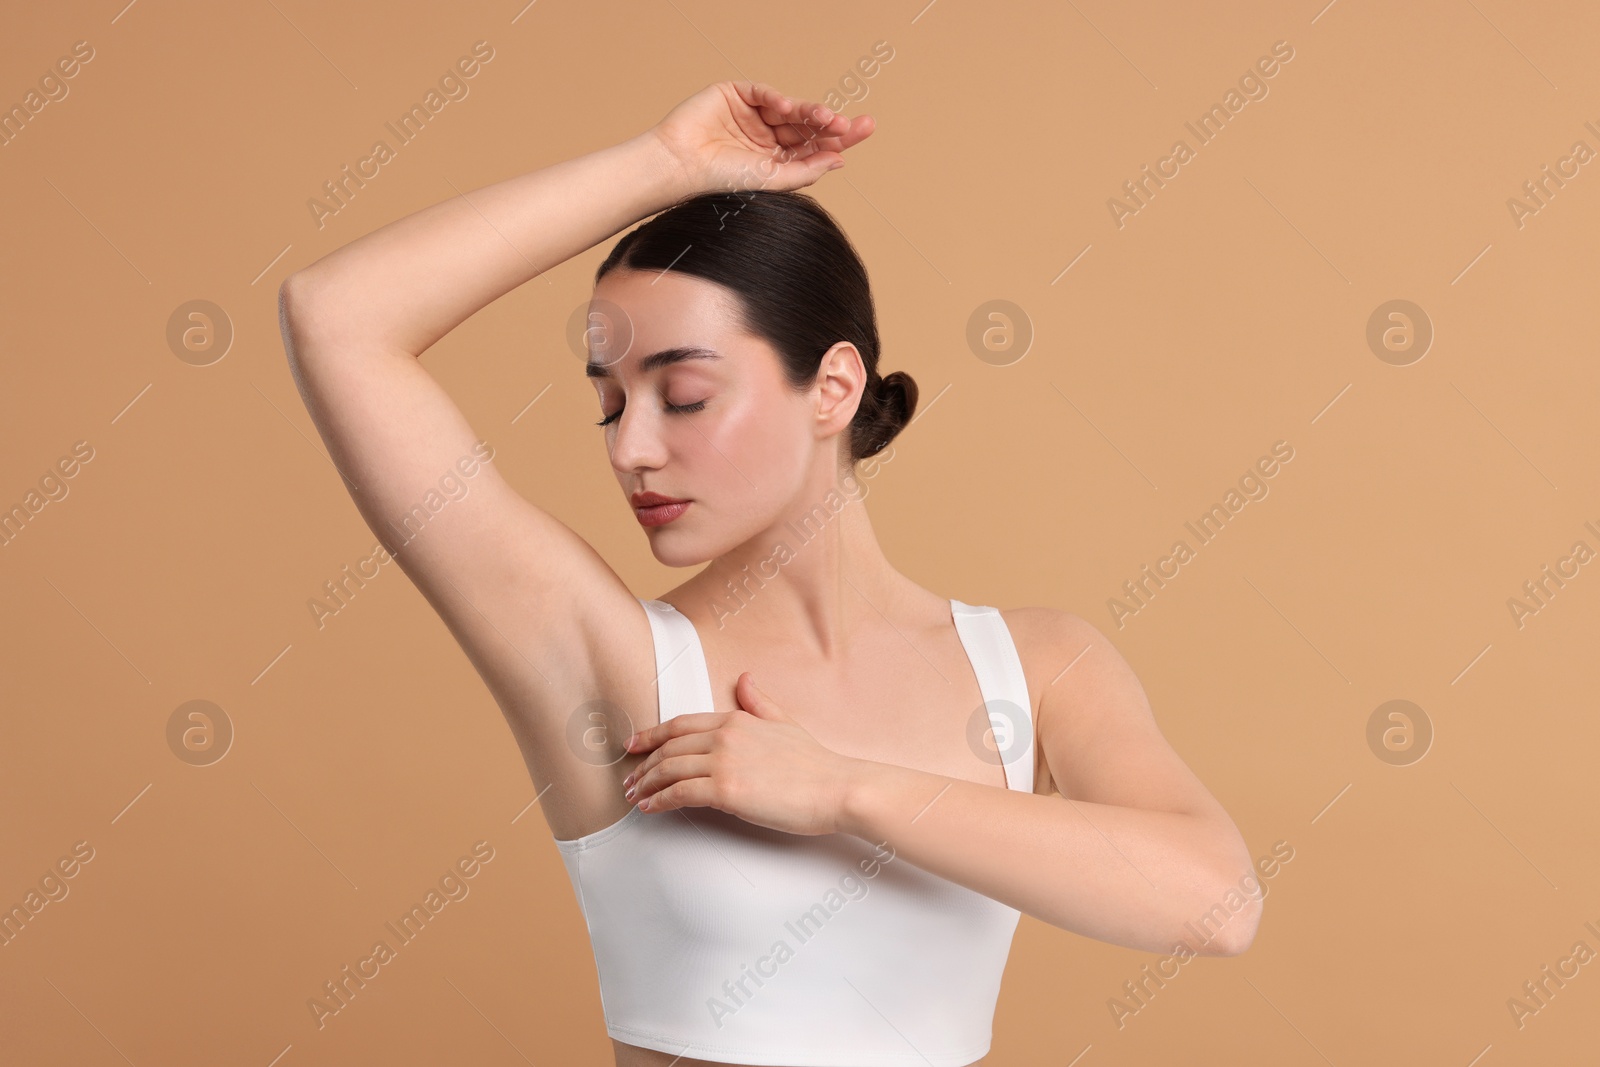 Photo of Beautiful woman showing armpit with smooth clean skin on beige background